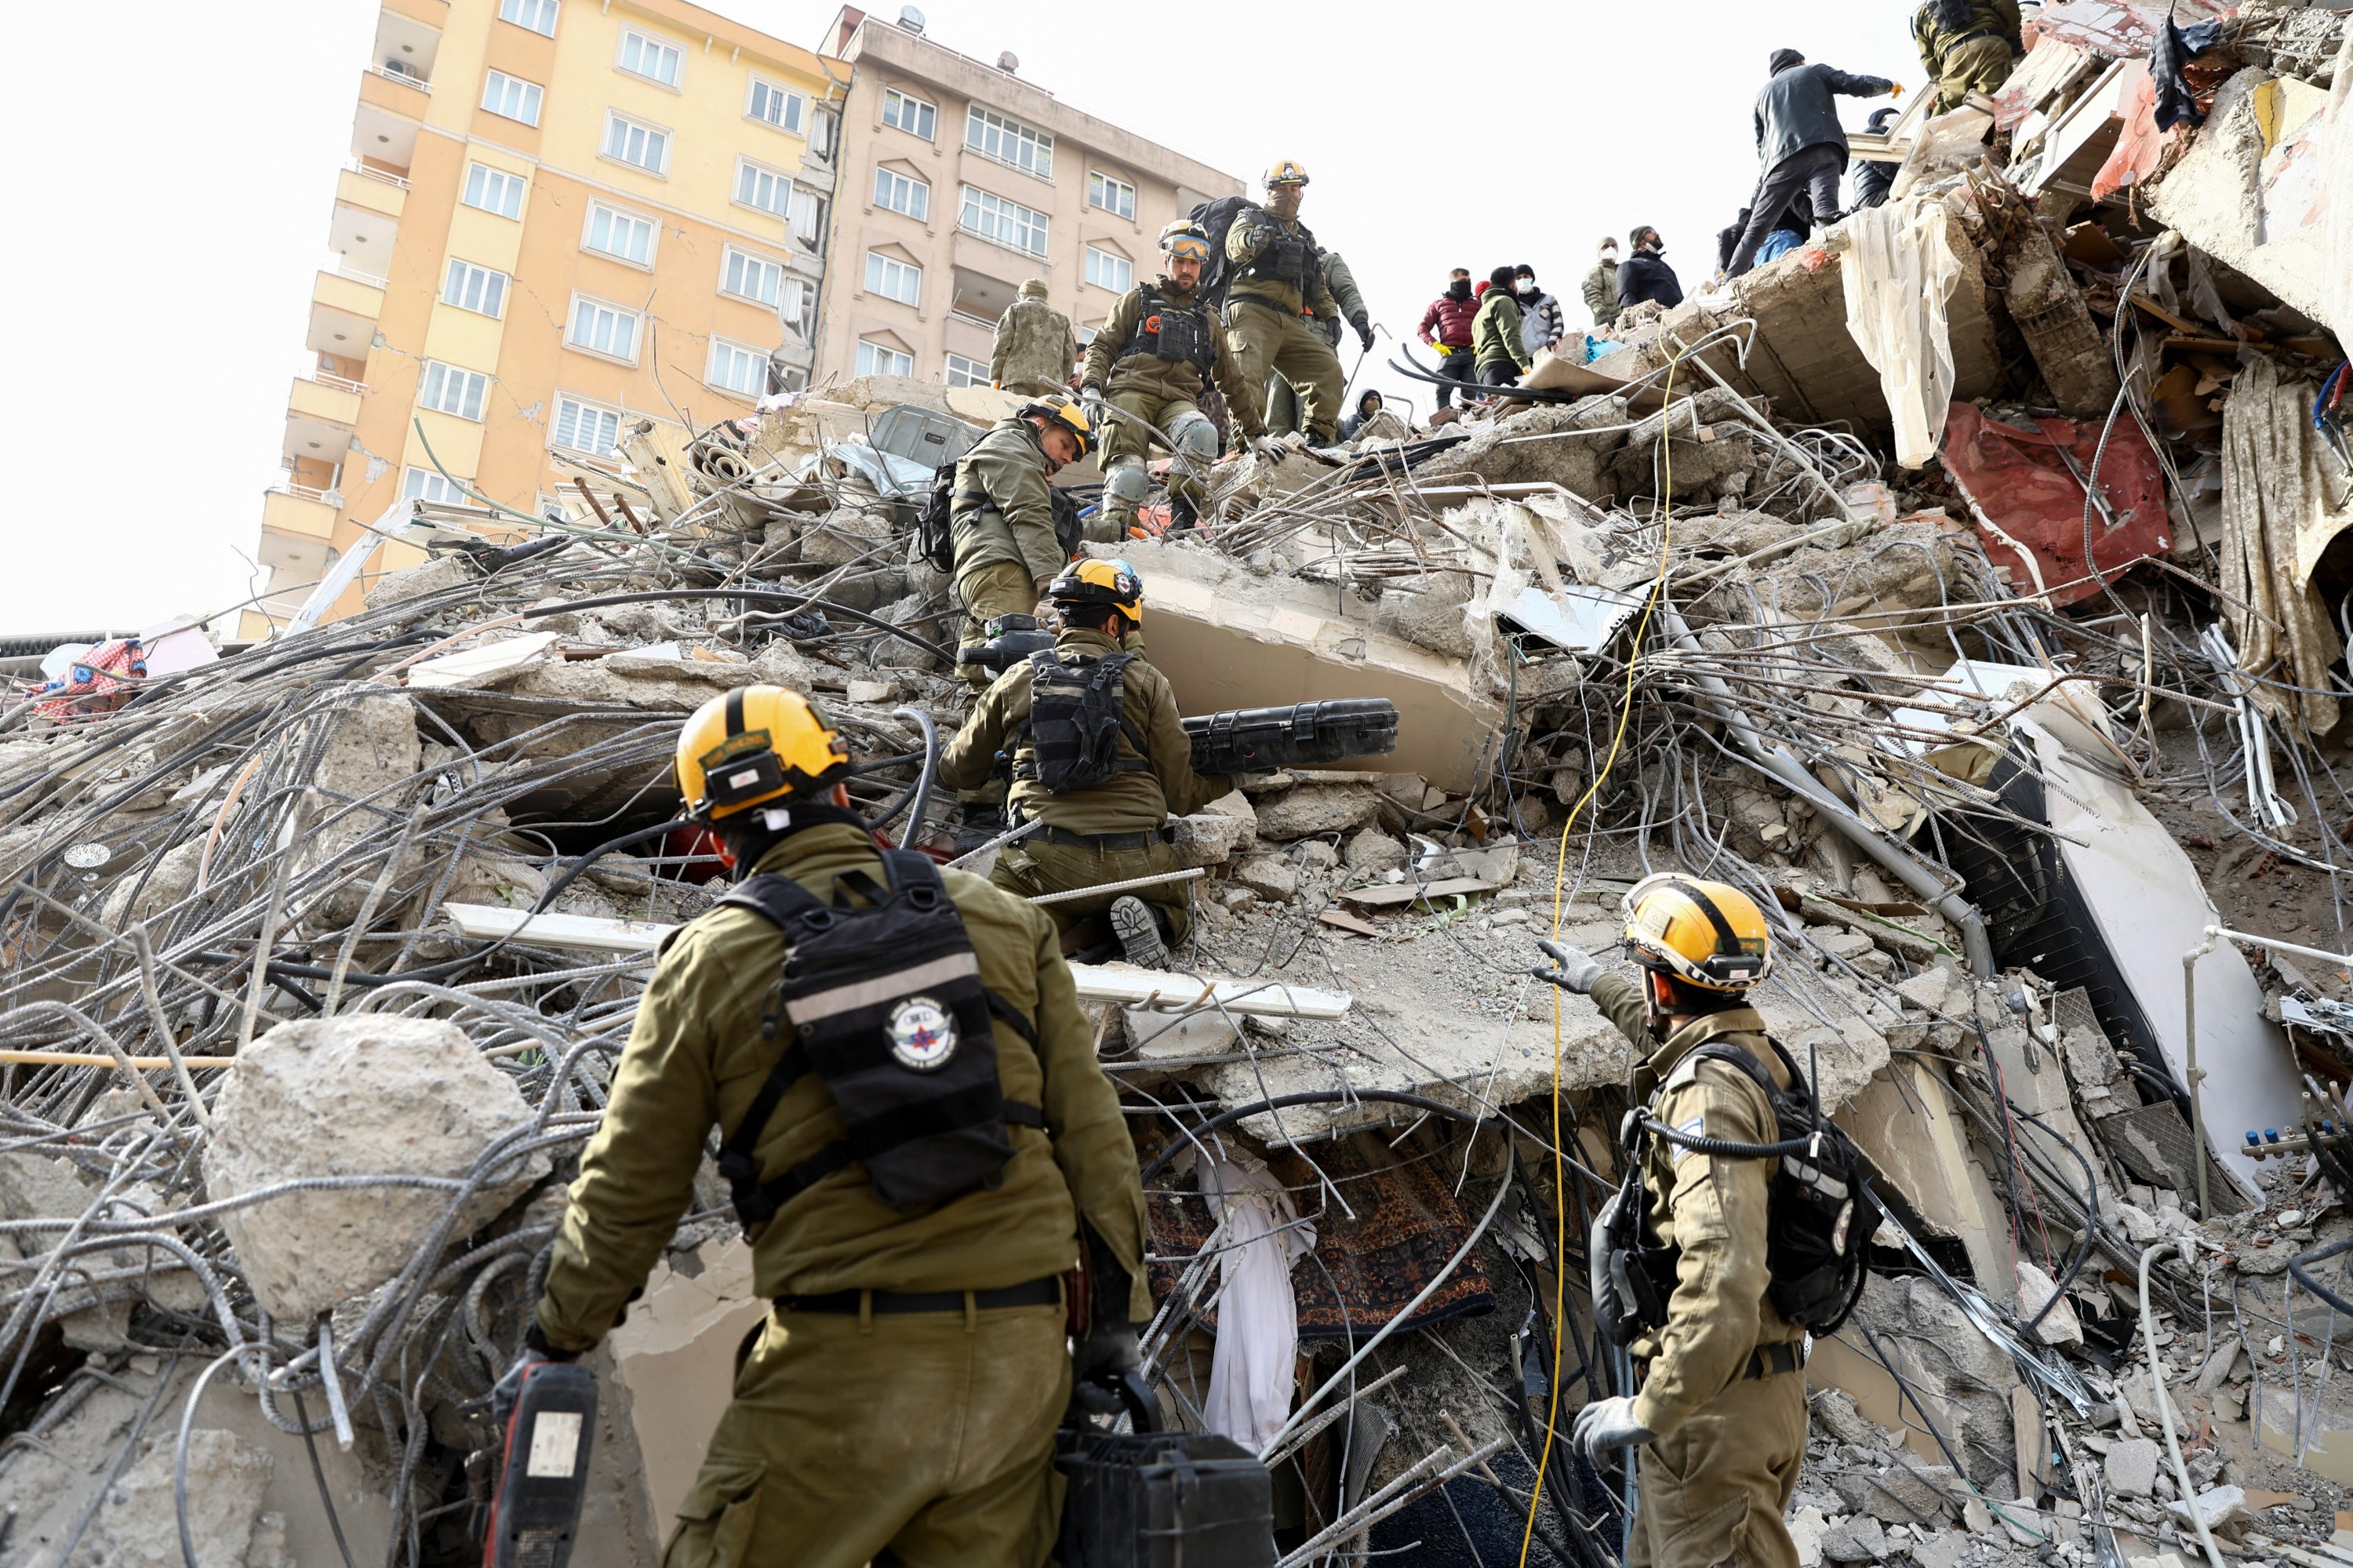 Members of the Israel Defense Forces (IDF) search for survivors in the rubble in the aftermath of the twin quakes in Kahramanmaraş, Türkiye, Feb. 10, 2023. (Reuters Photo)